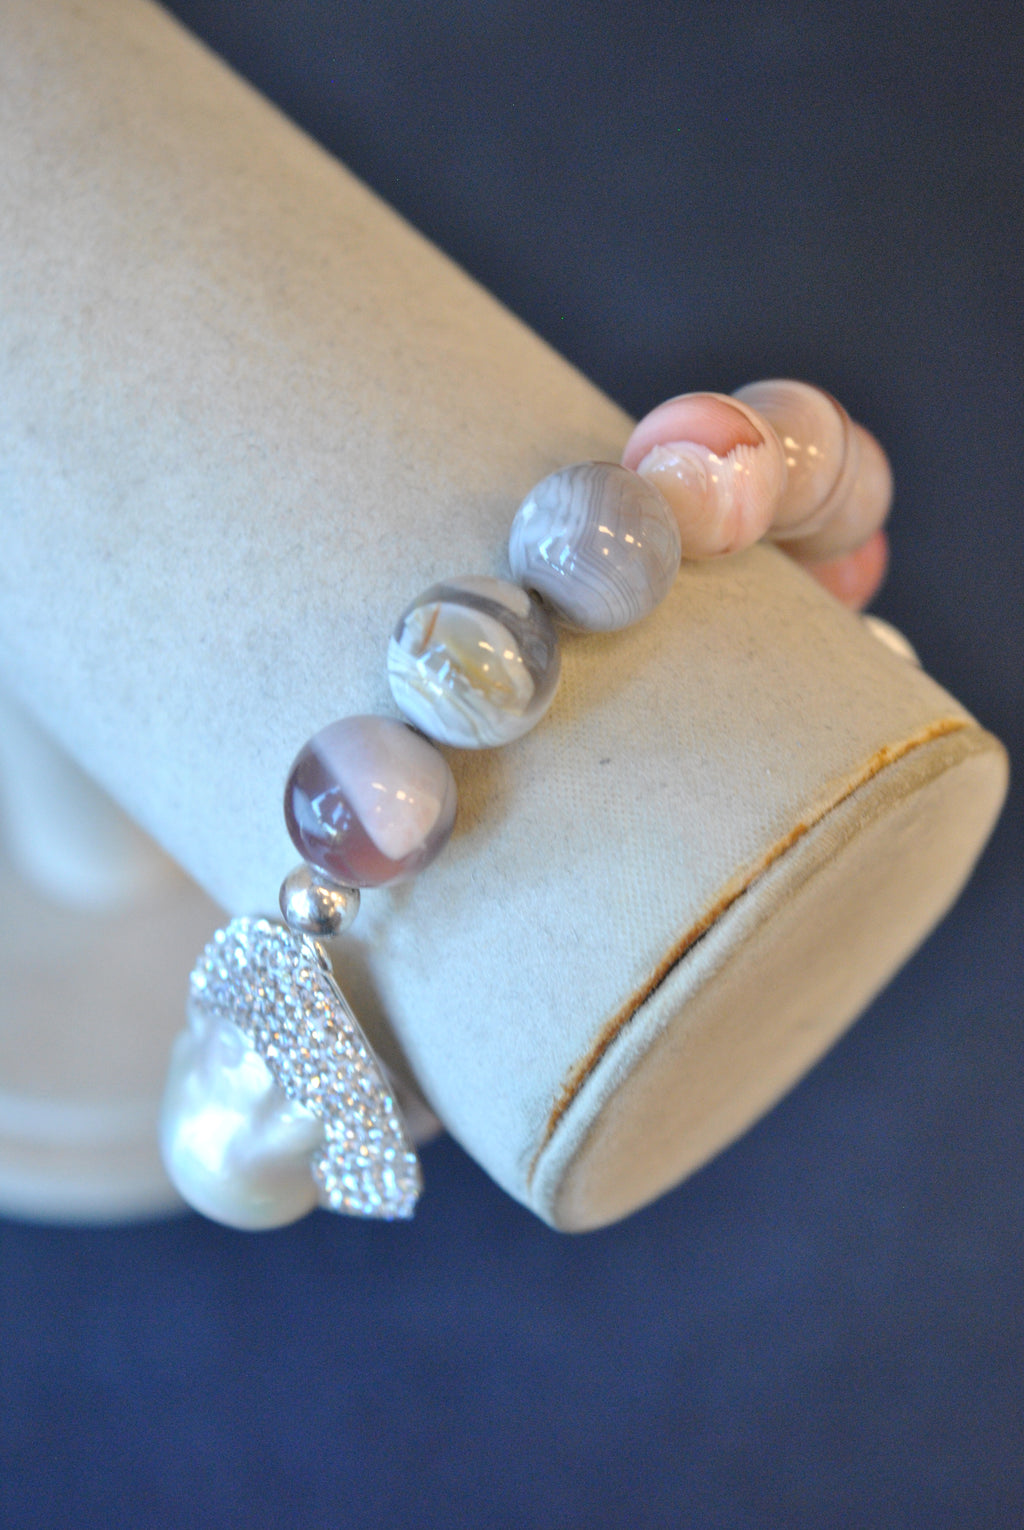 PINK BOTSWANA AGATE WITH MOTHER OF PEARLS AND SWAROVSKI CRYSTALS STATEMENT STRETCHY BRACELET